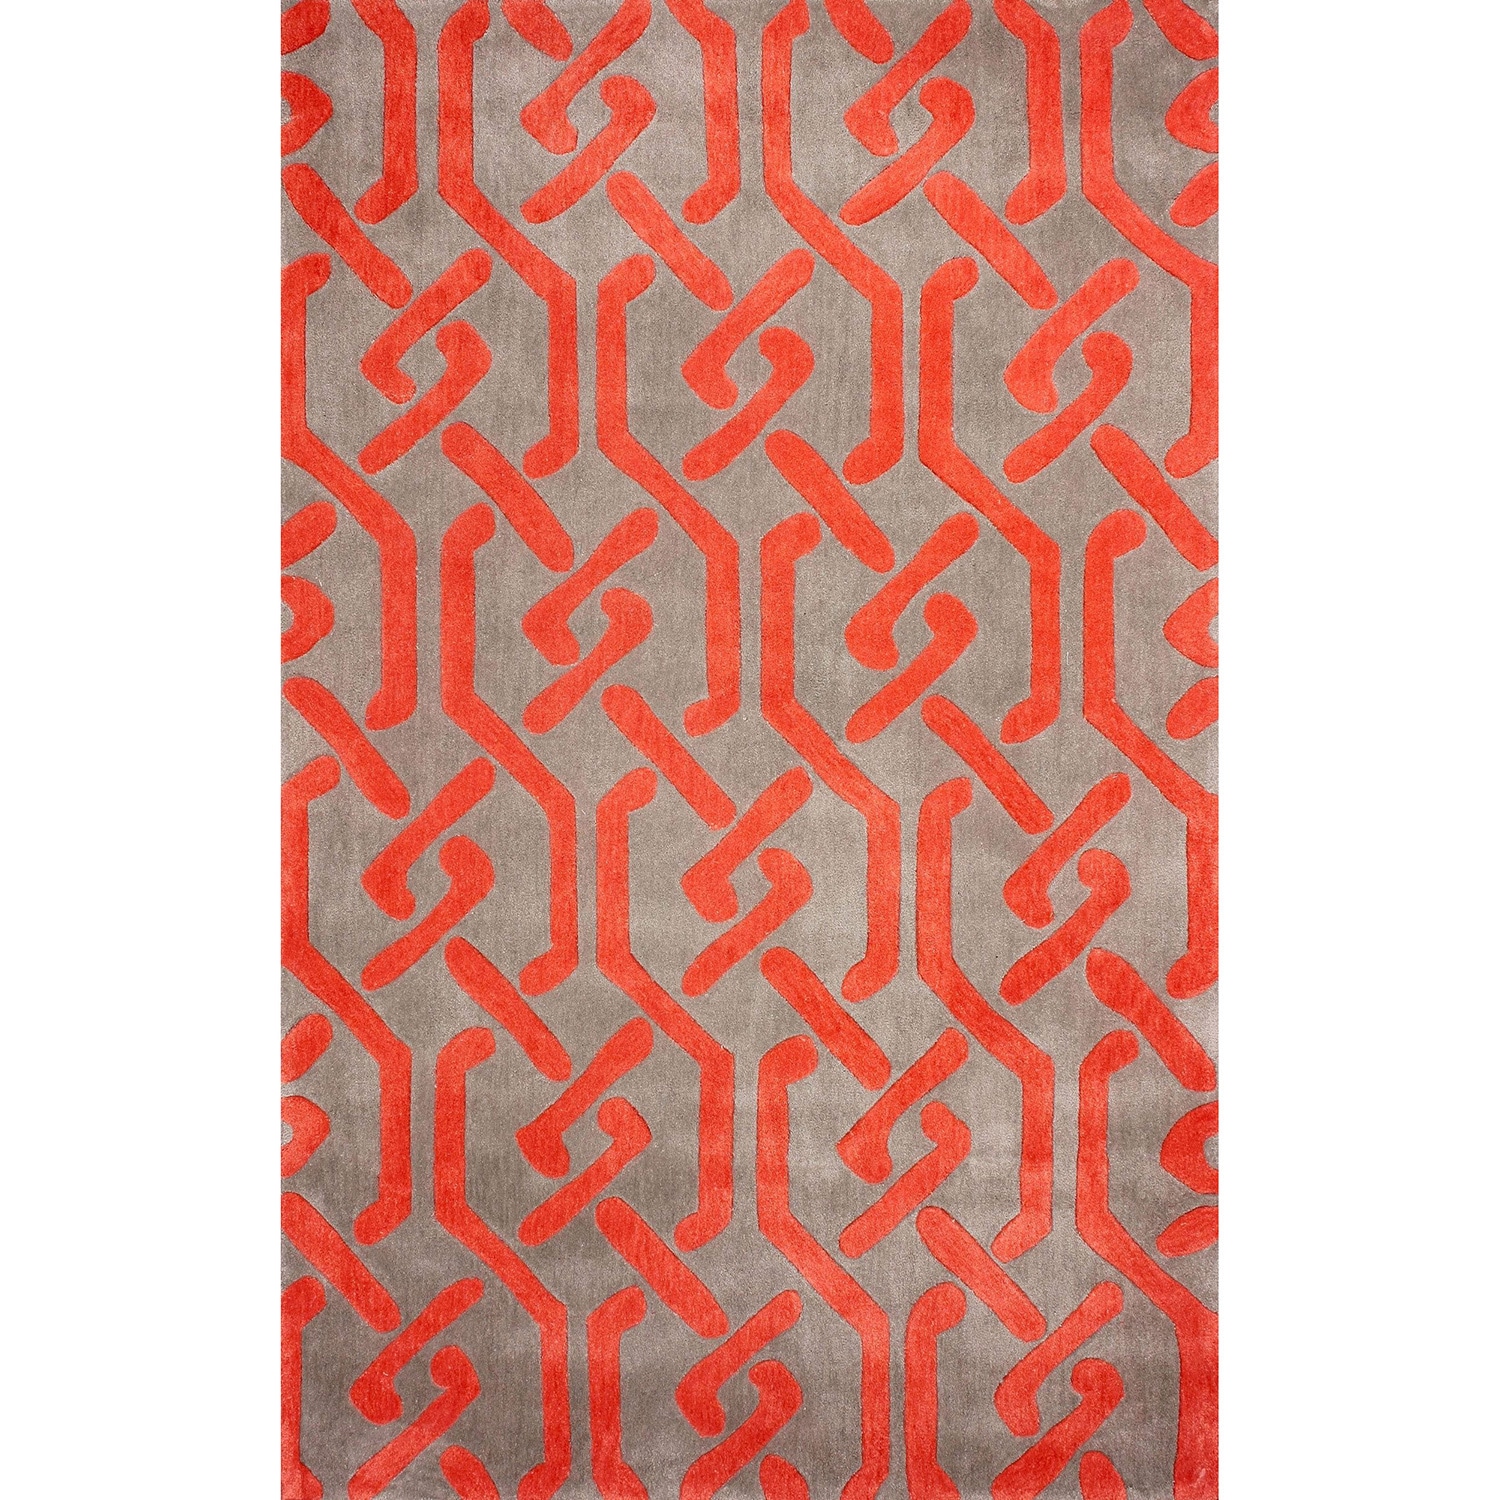 Nuloom Hand tufted Chain Trellis Synthetics Red Rug (7 6 X 9 6)